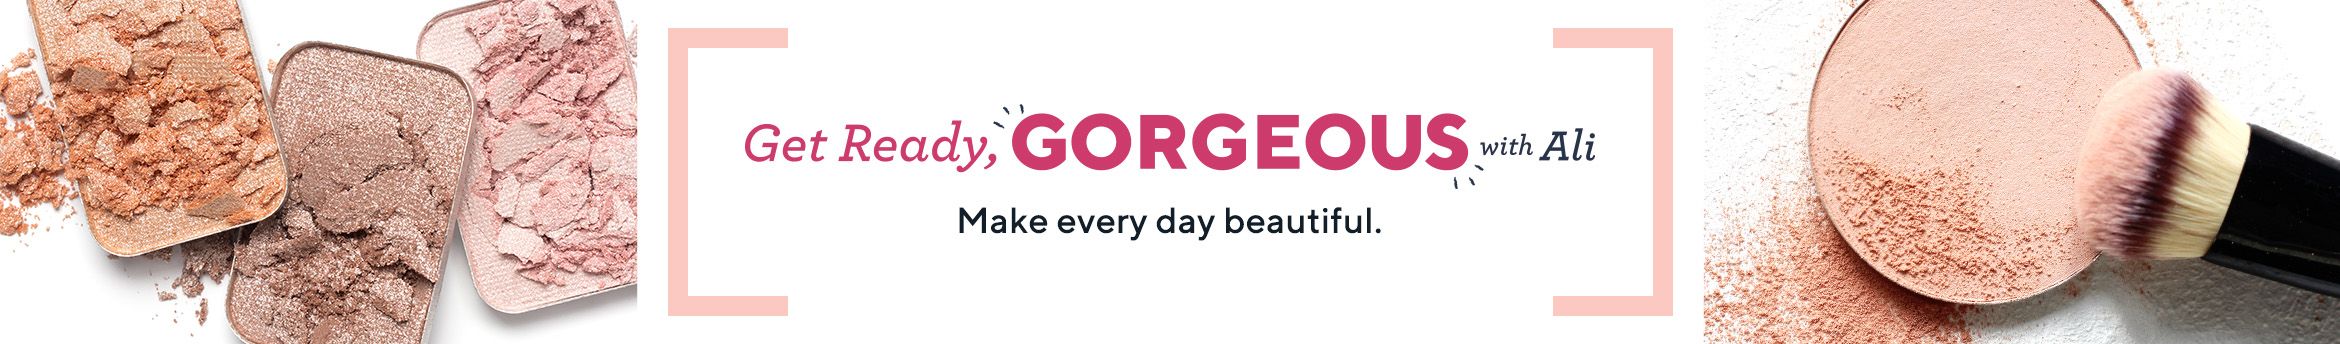 Get Ready, Gorgeous with Ali- Make every day beautiful. 